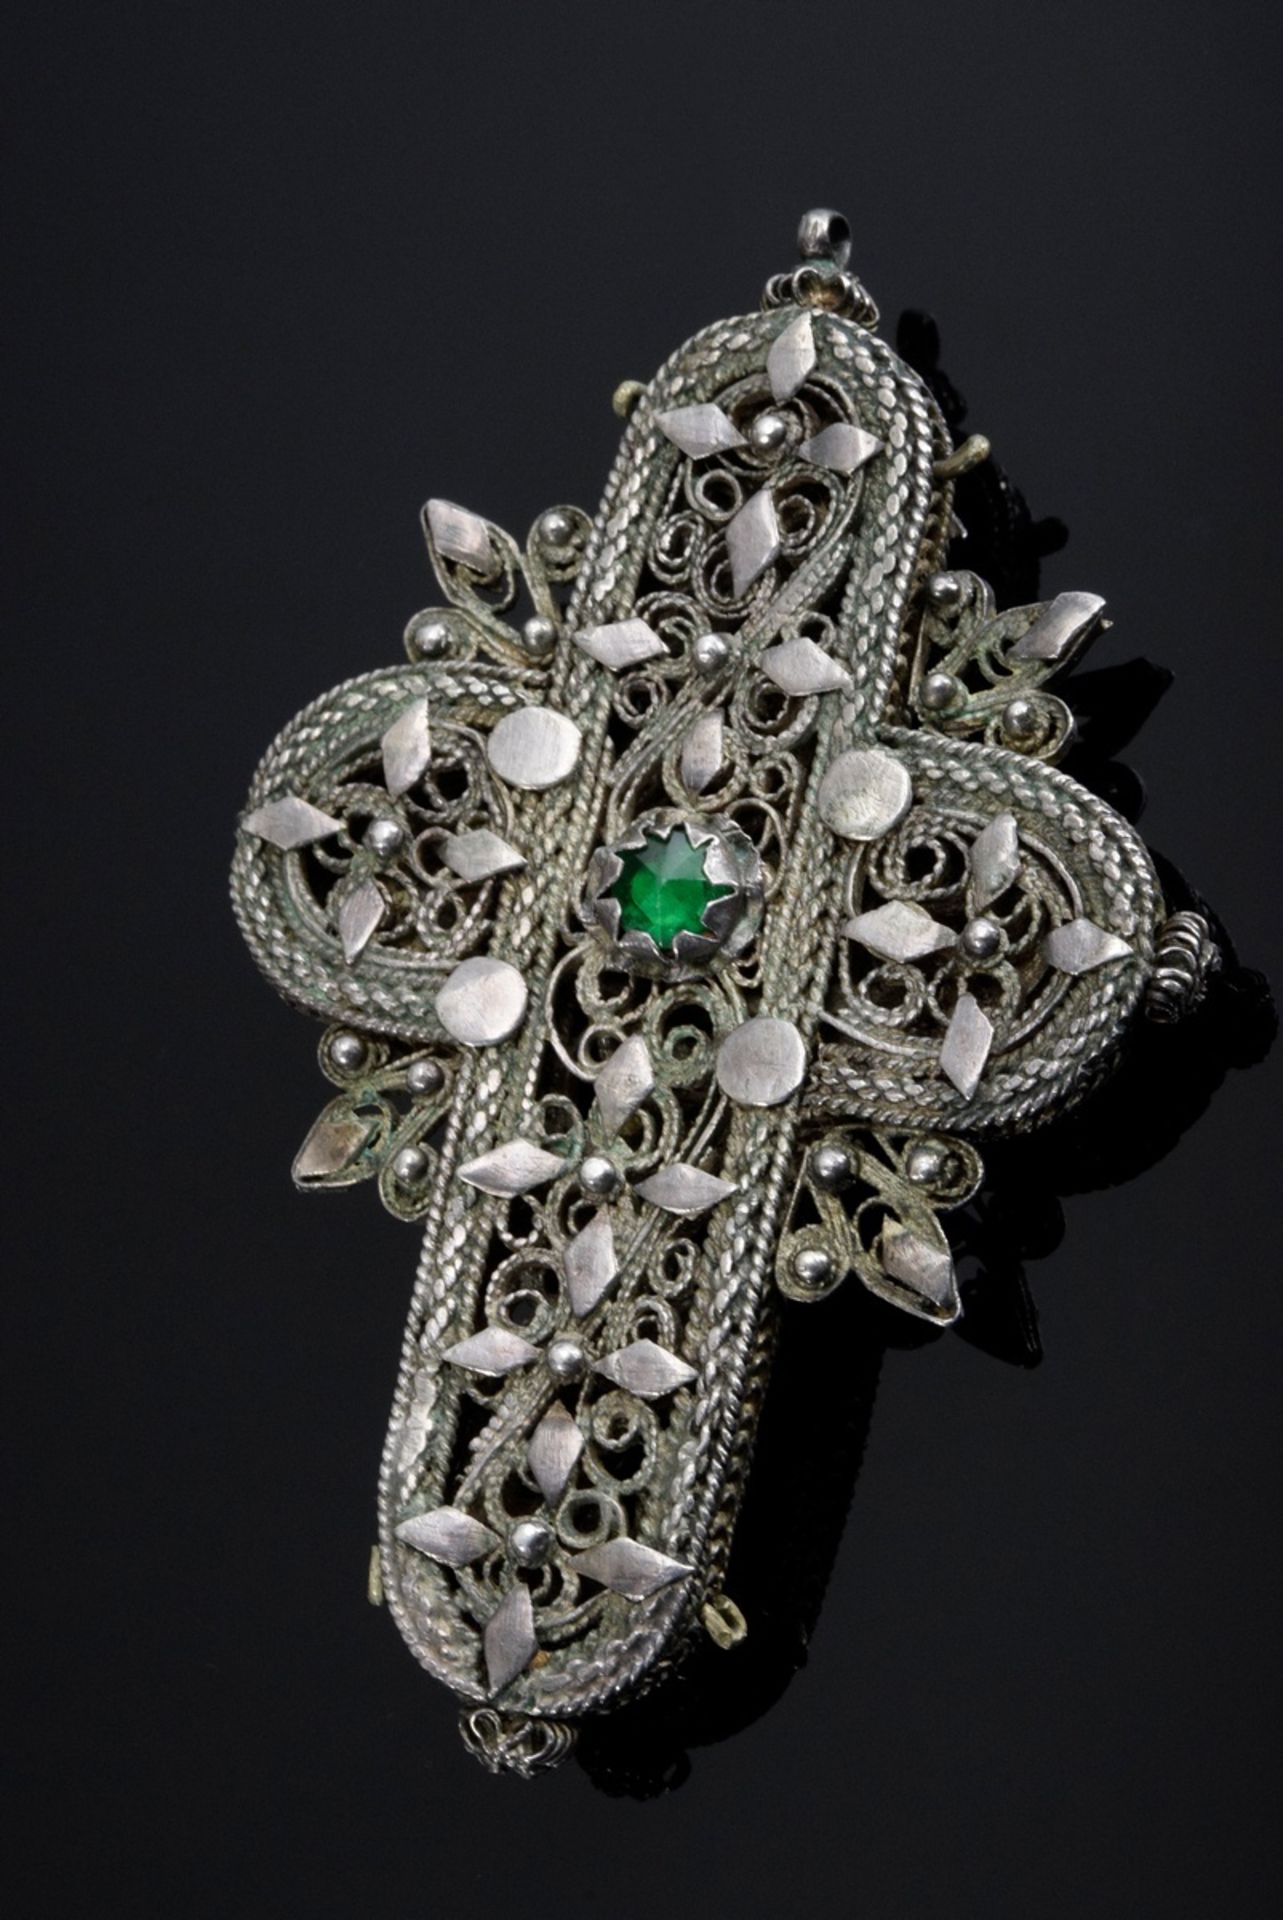 Traditional costume jewellery "Cross" pendant in silver filigree with coloured stones and brass bod - Image 2 of 2